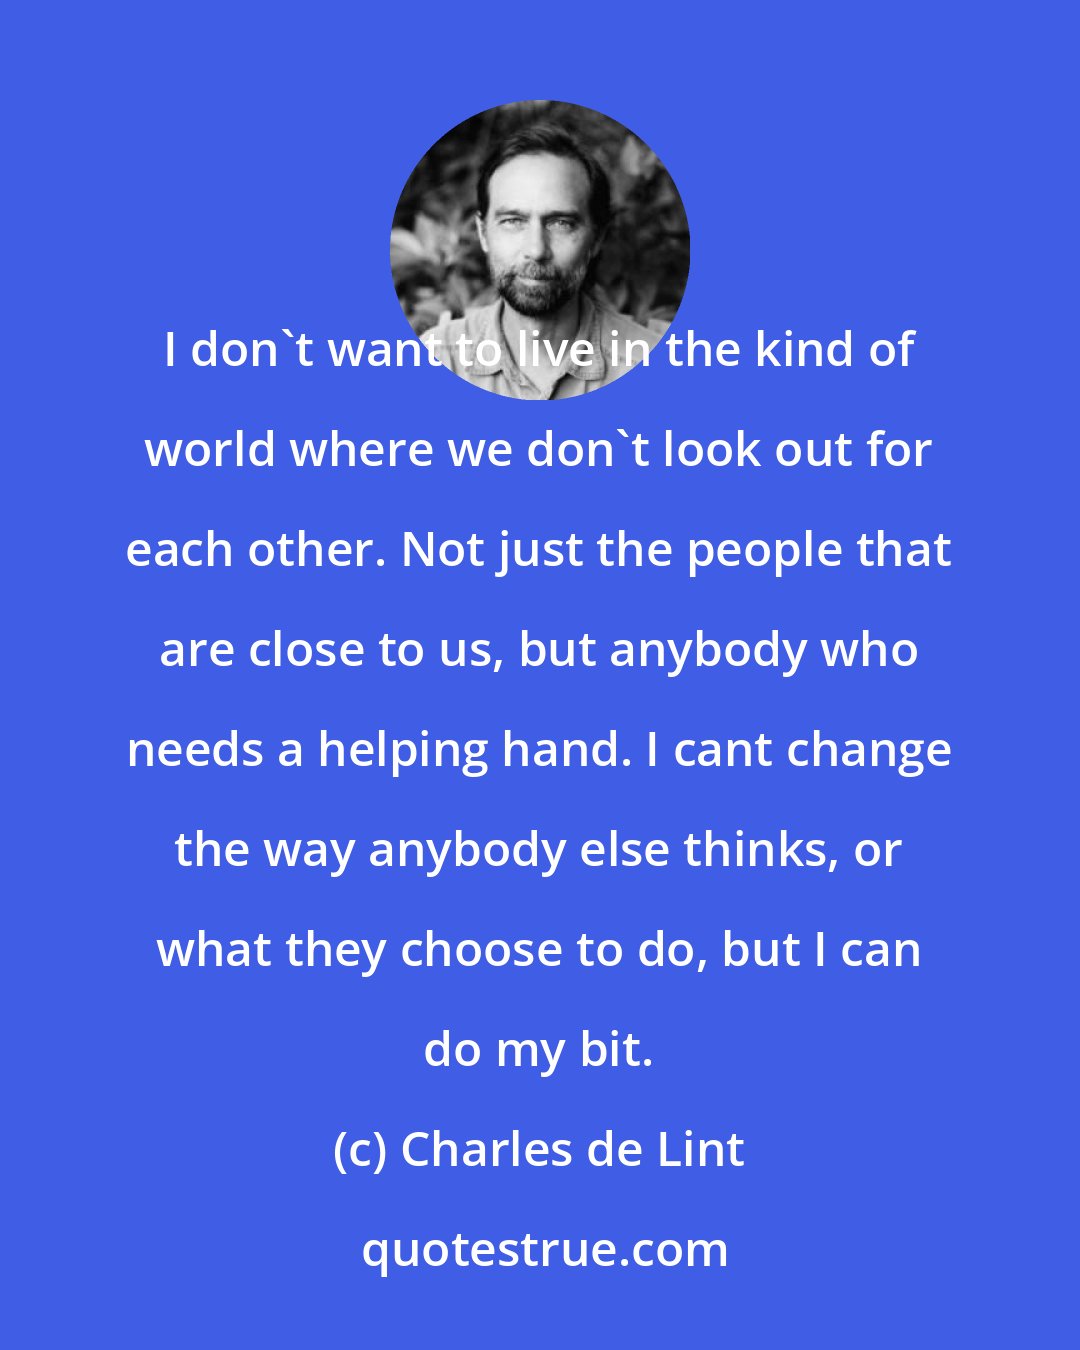 Charles de Lint: I don't want to live in the kind of world where we don't look out for each other. Not just the people that are close to us, but anybody who needs a helping hand. I cant change the way anybody else thinks, or what they choose to do, but I can do my bit.